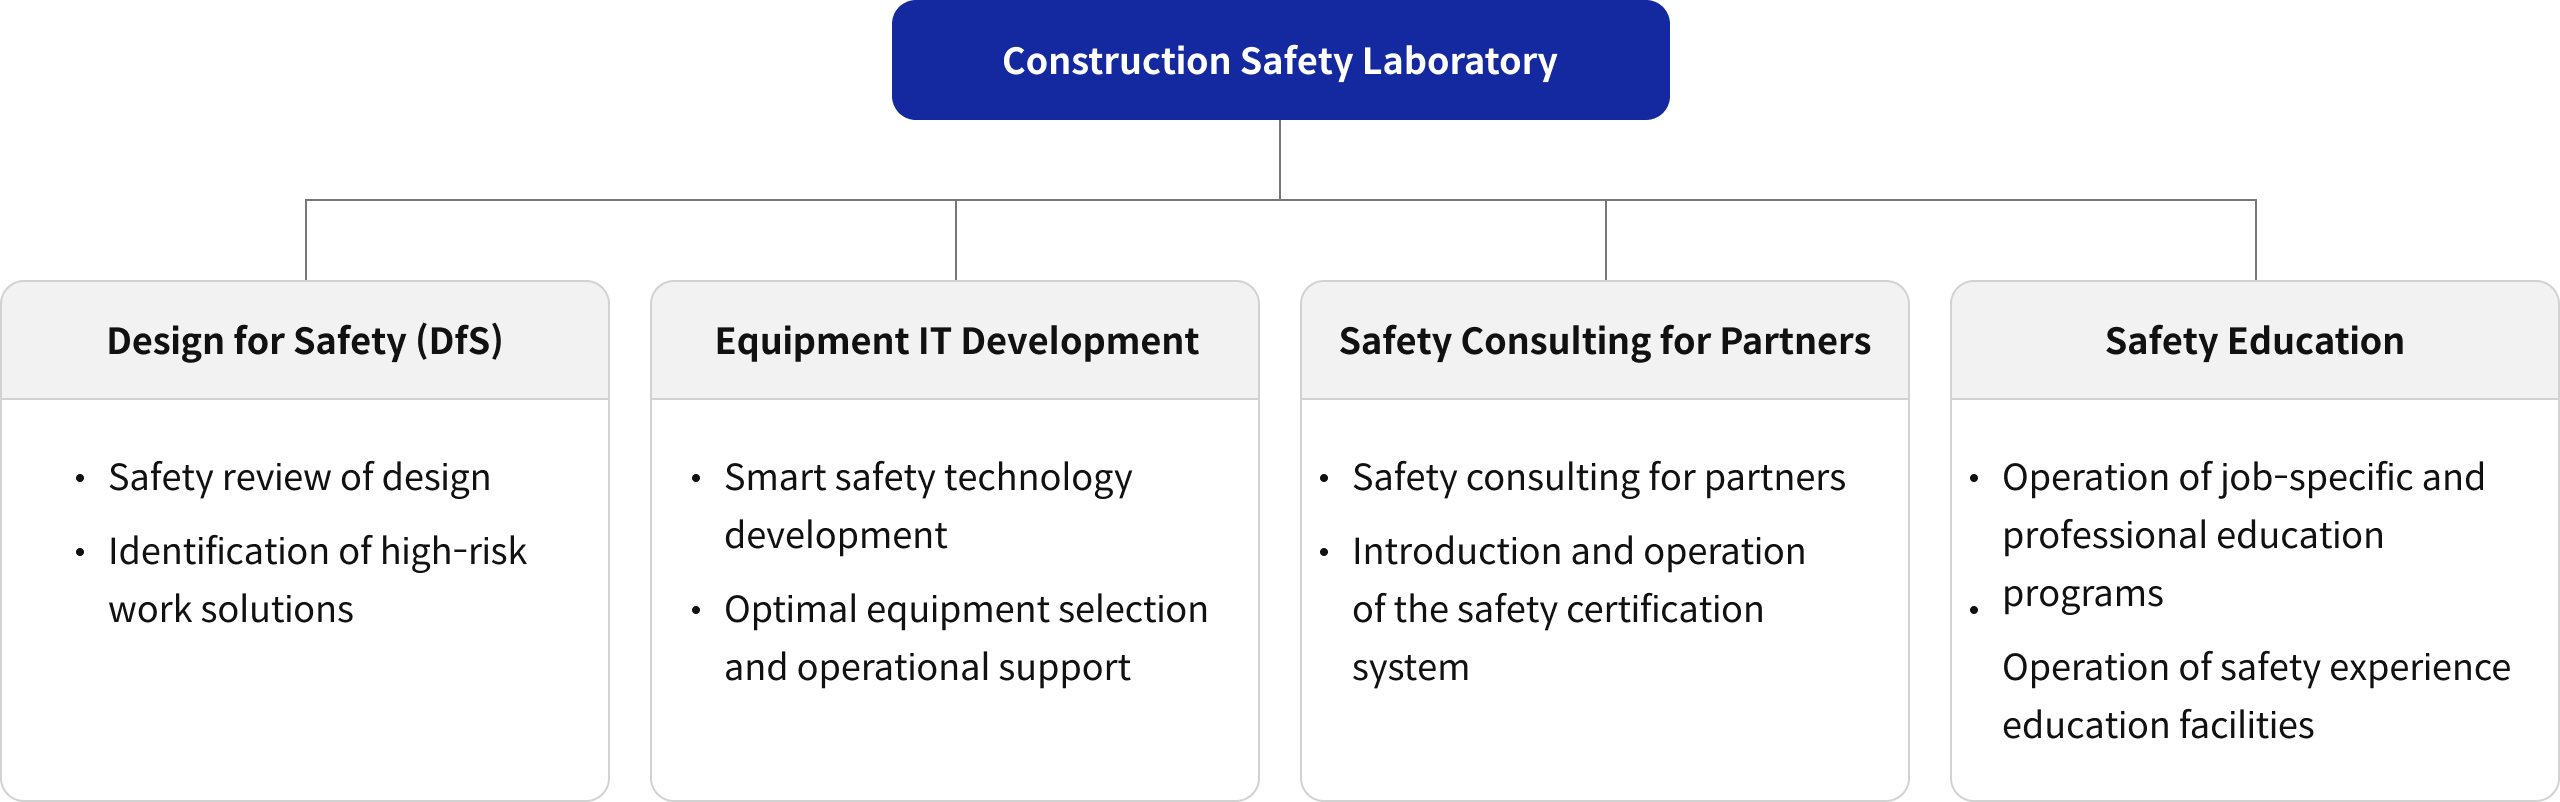 Construction Safety Laboratory * Design for Safety (DfS) Safety review of design Identification of high-risk work solutions, Equipment IT Development Smart safety technology development Optimal equipment selection and operational support, Safety Consulting for Partners Safety consulting for partners Introduction and operation of the safety certification system, Safety Education Operation of job-specific and professional education programs, Operation of safety experience education facilities